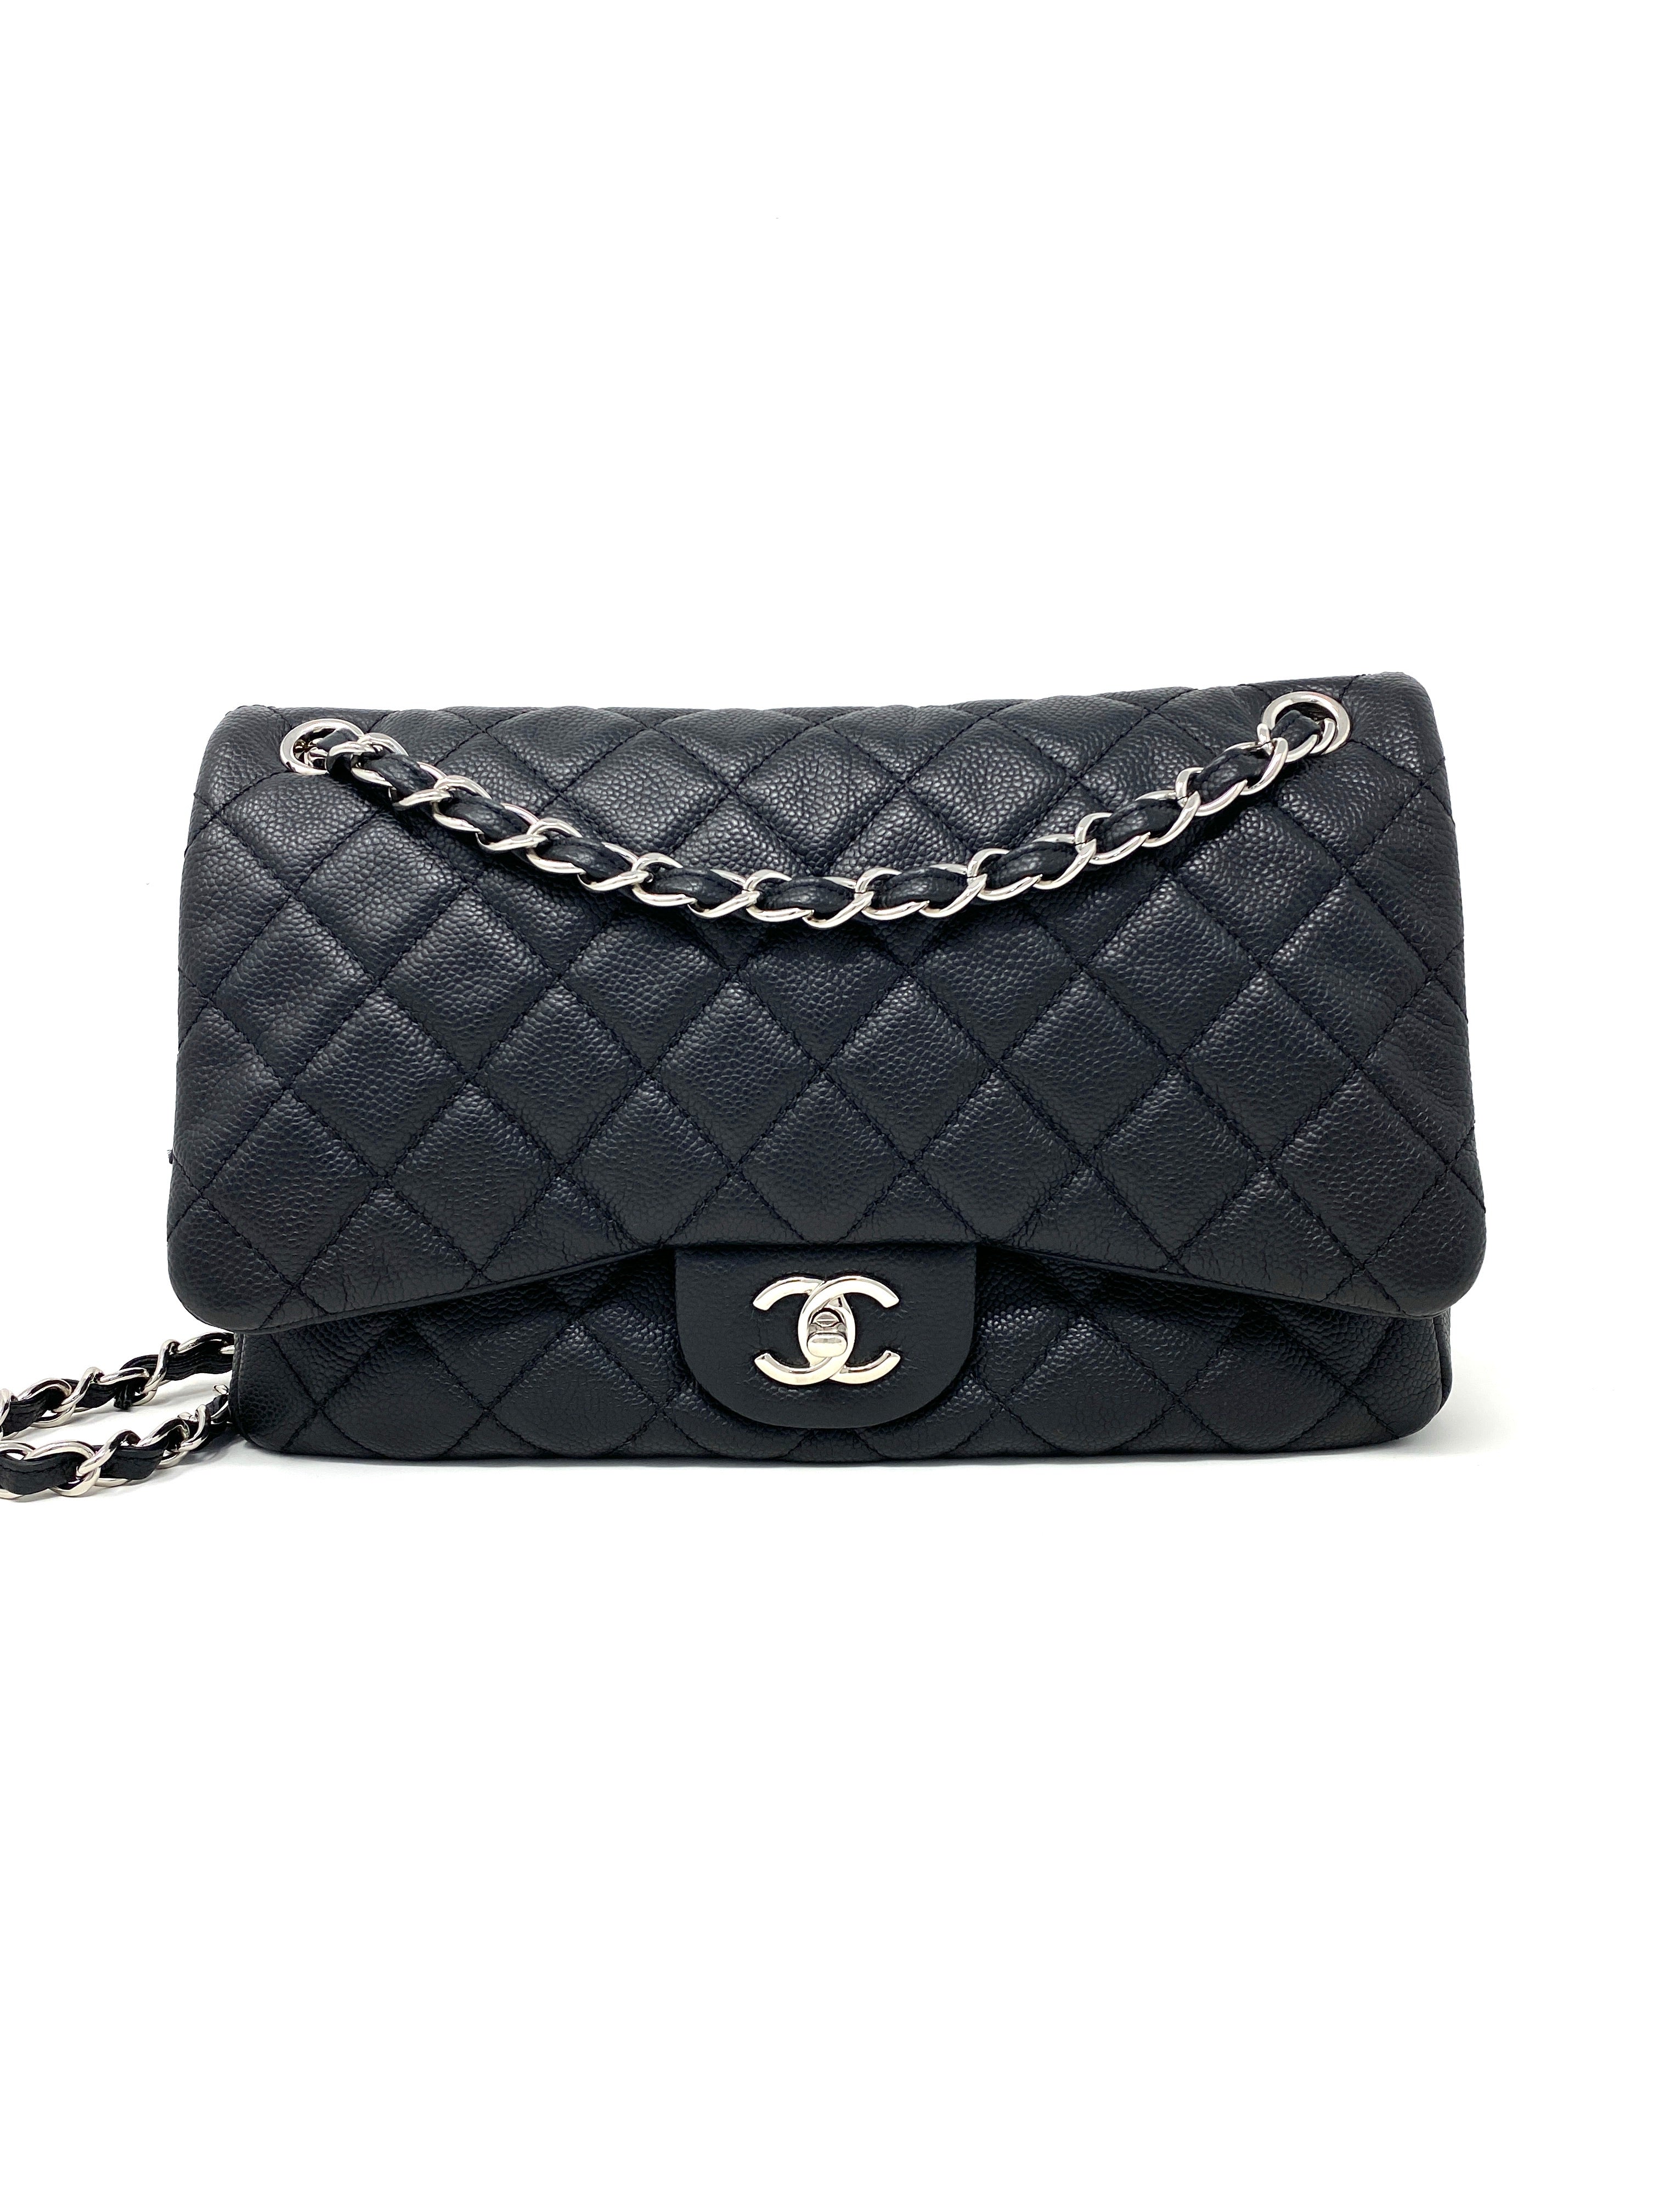 Chanel Black Quilted Caviar Leather Shiva Tote Chanel